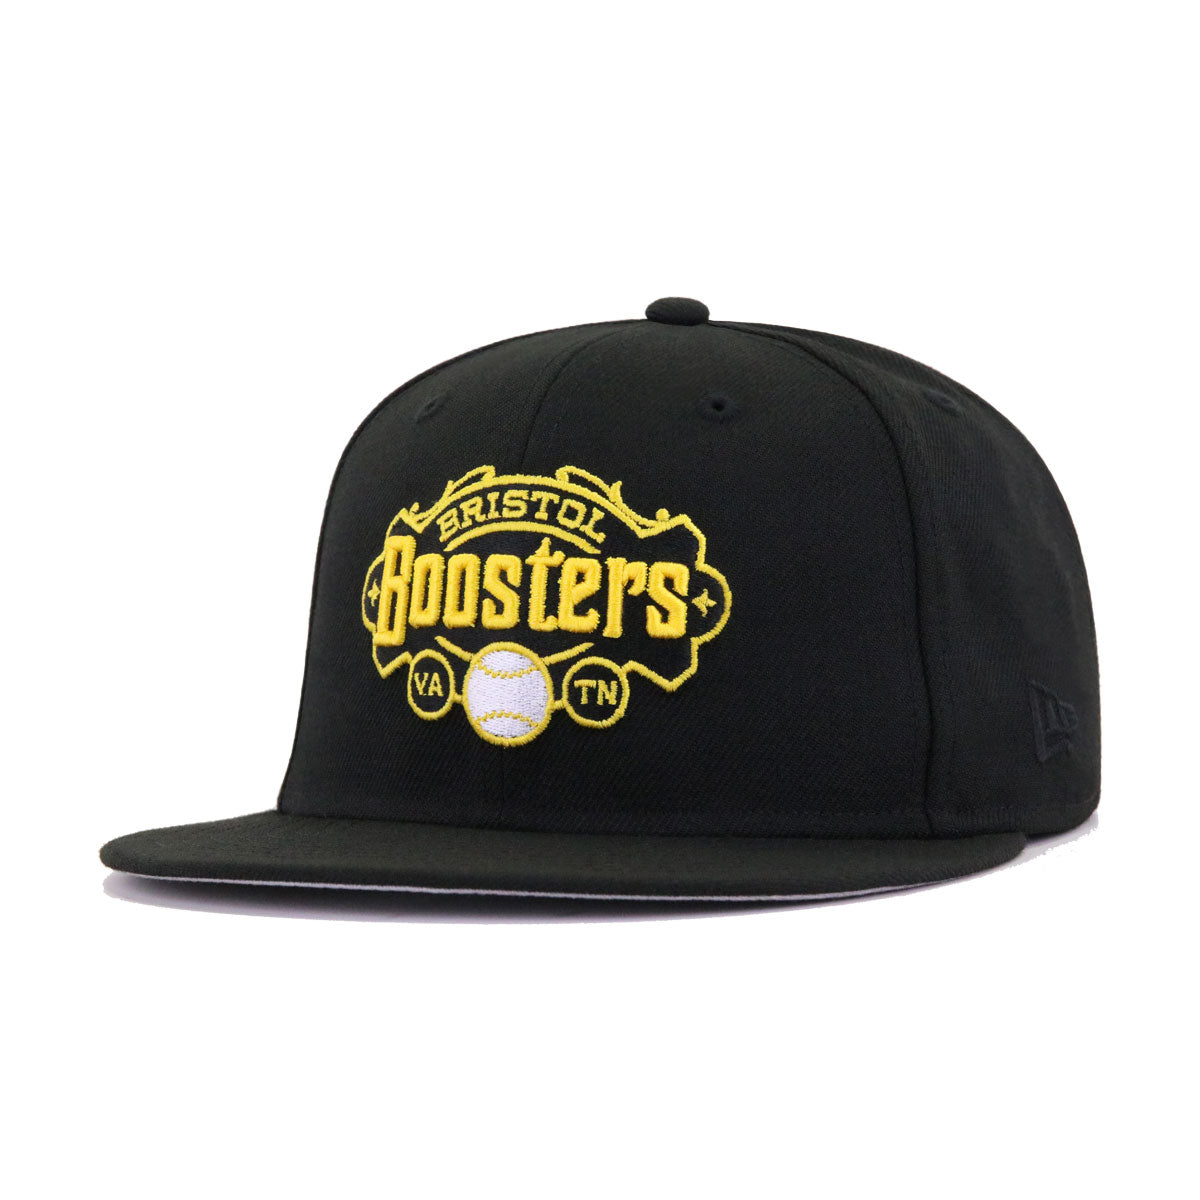 Bristol Boosters Black New Era 59Fifty Fitted